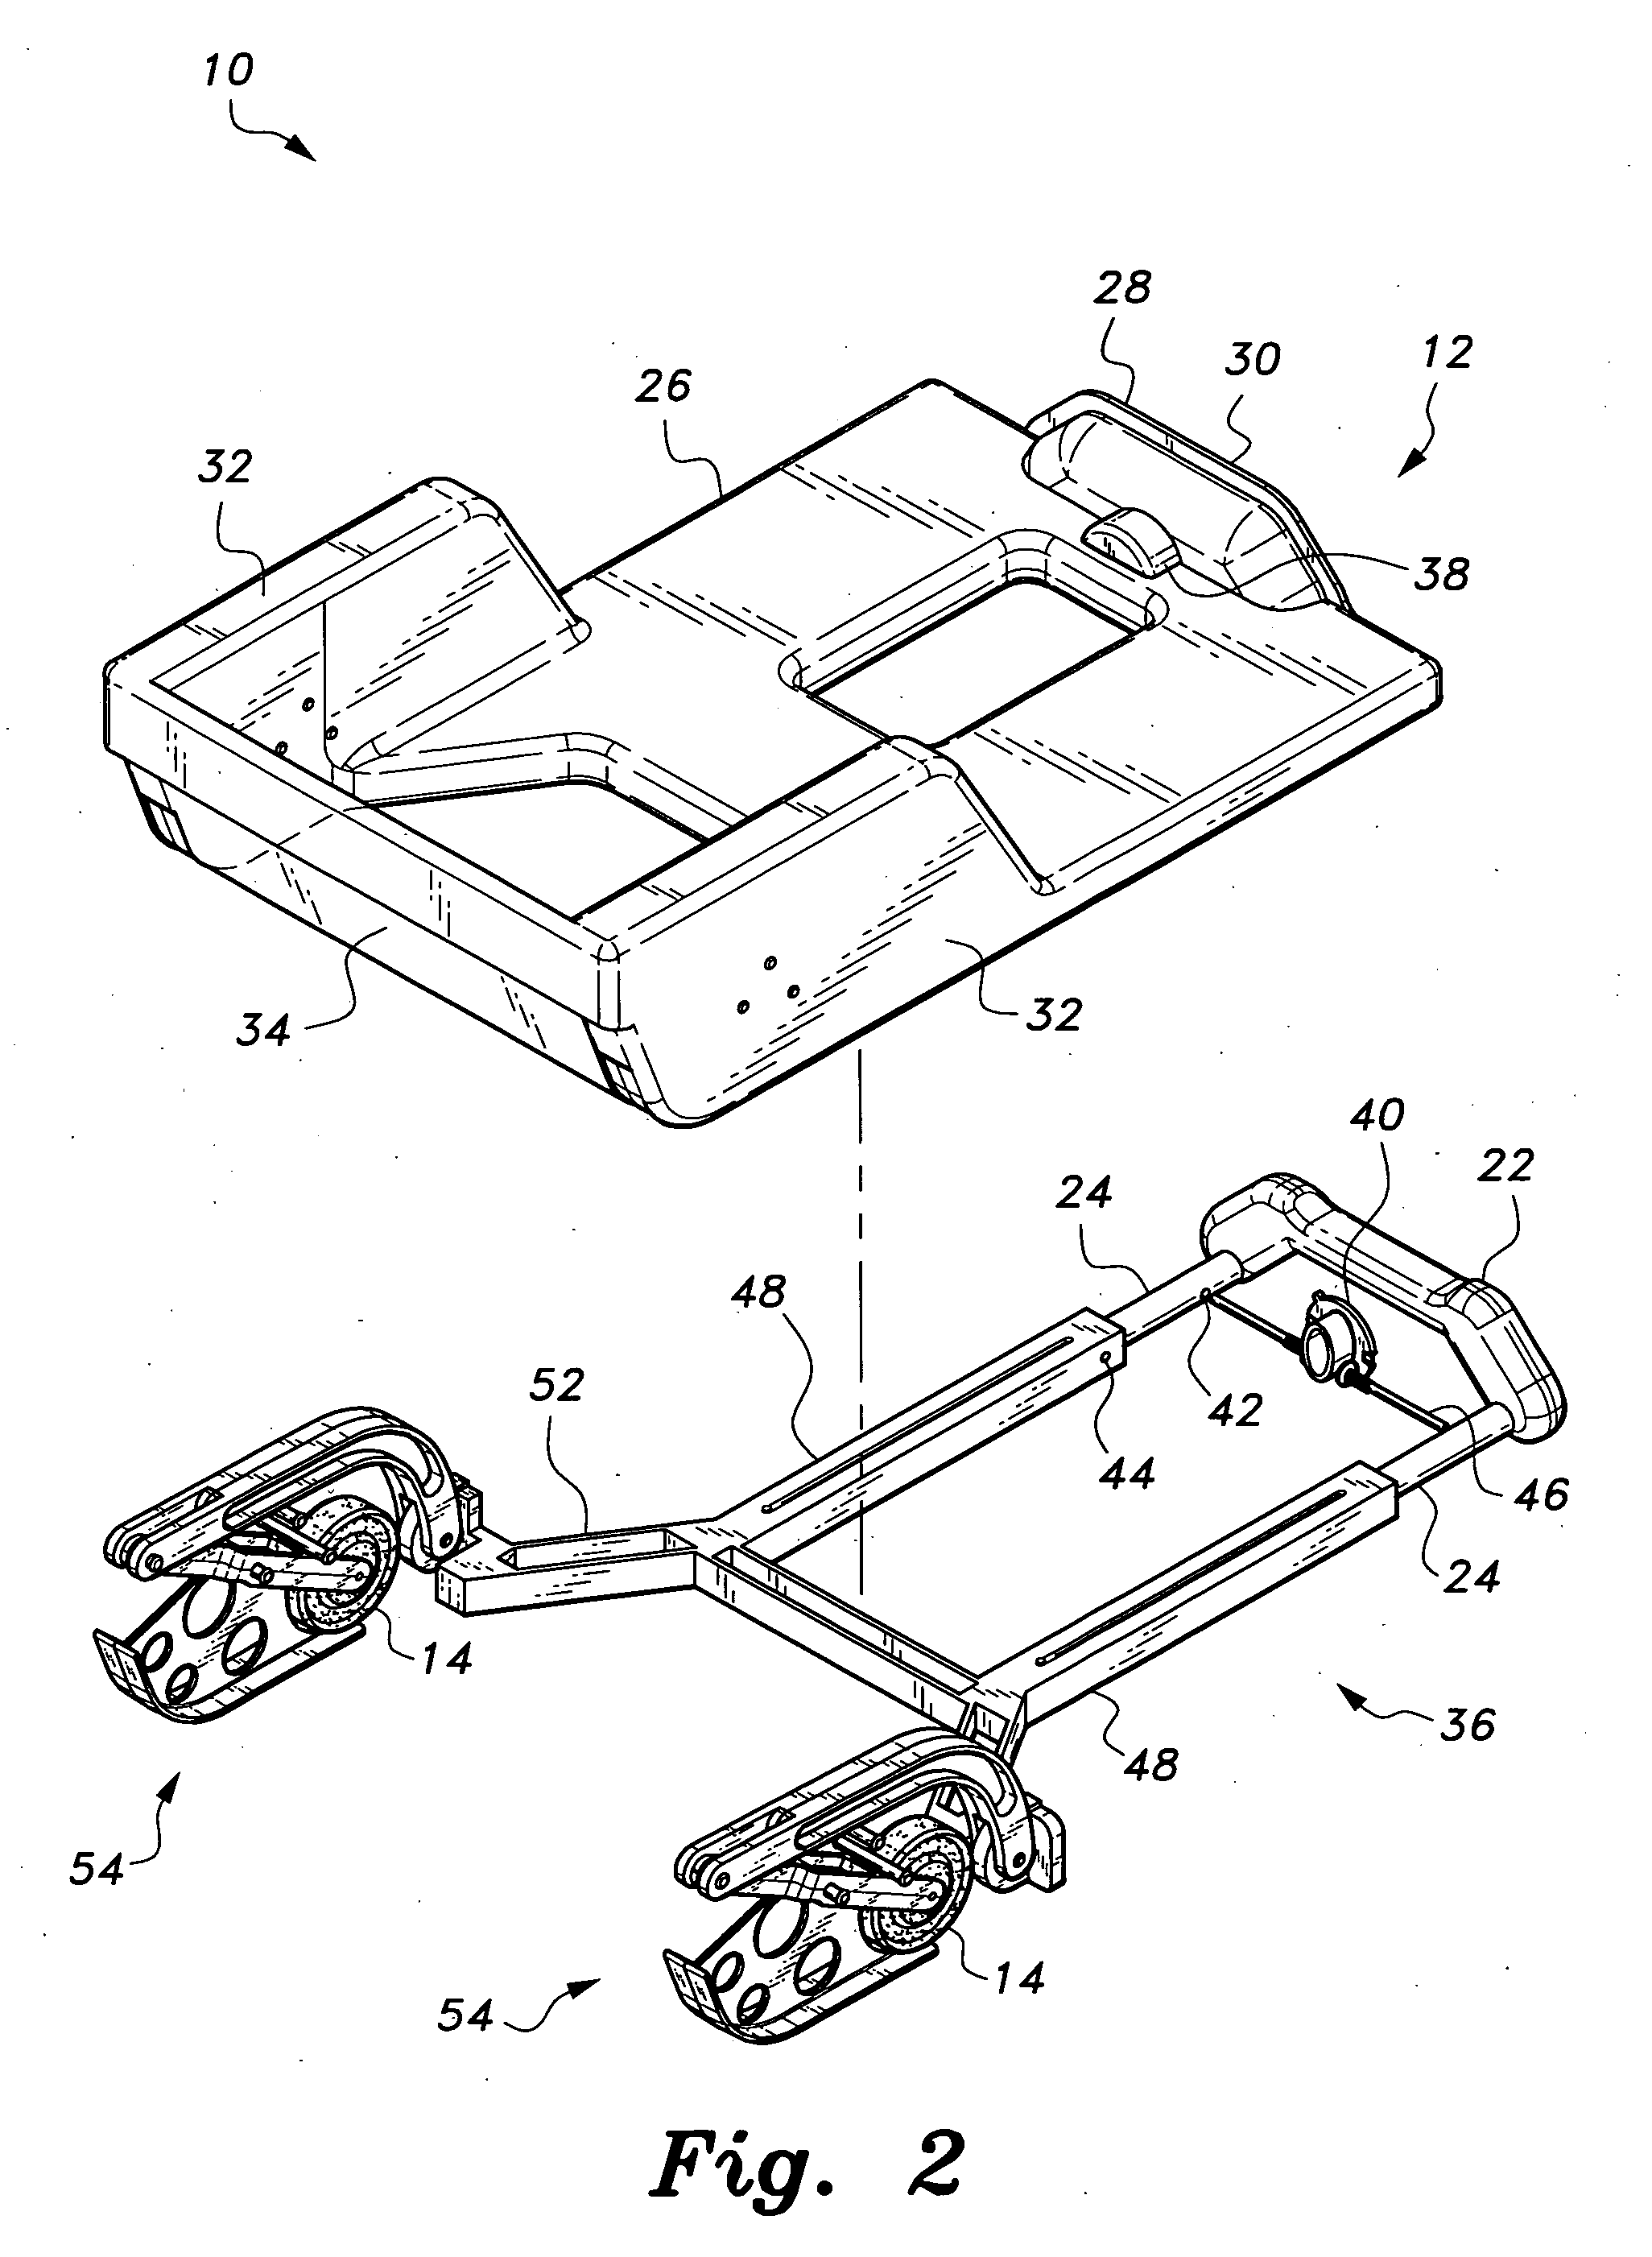 Chassis with retractable wheels